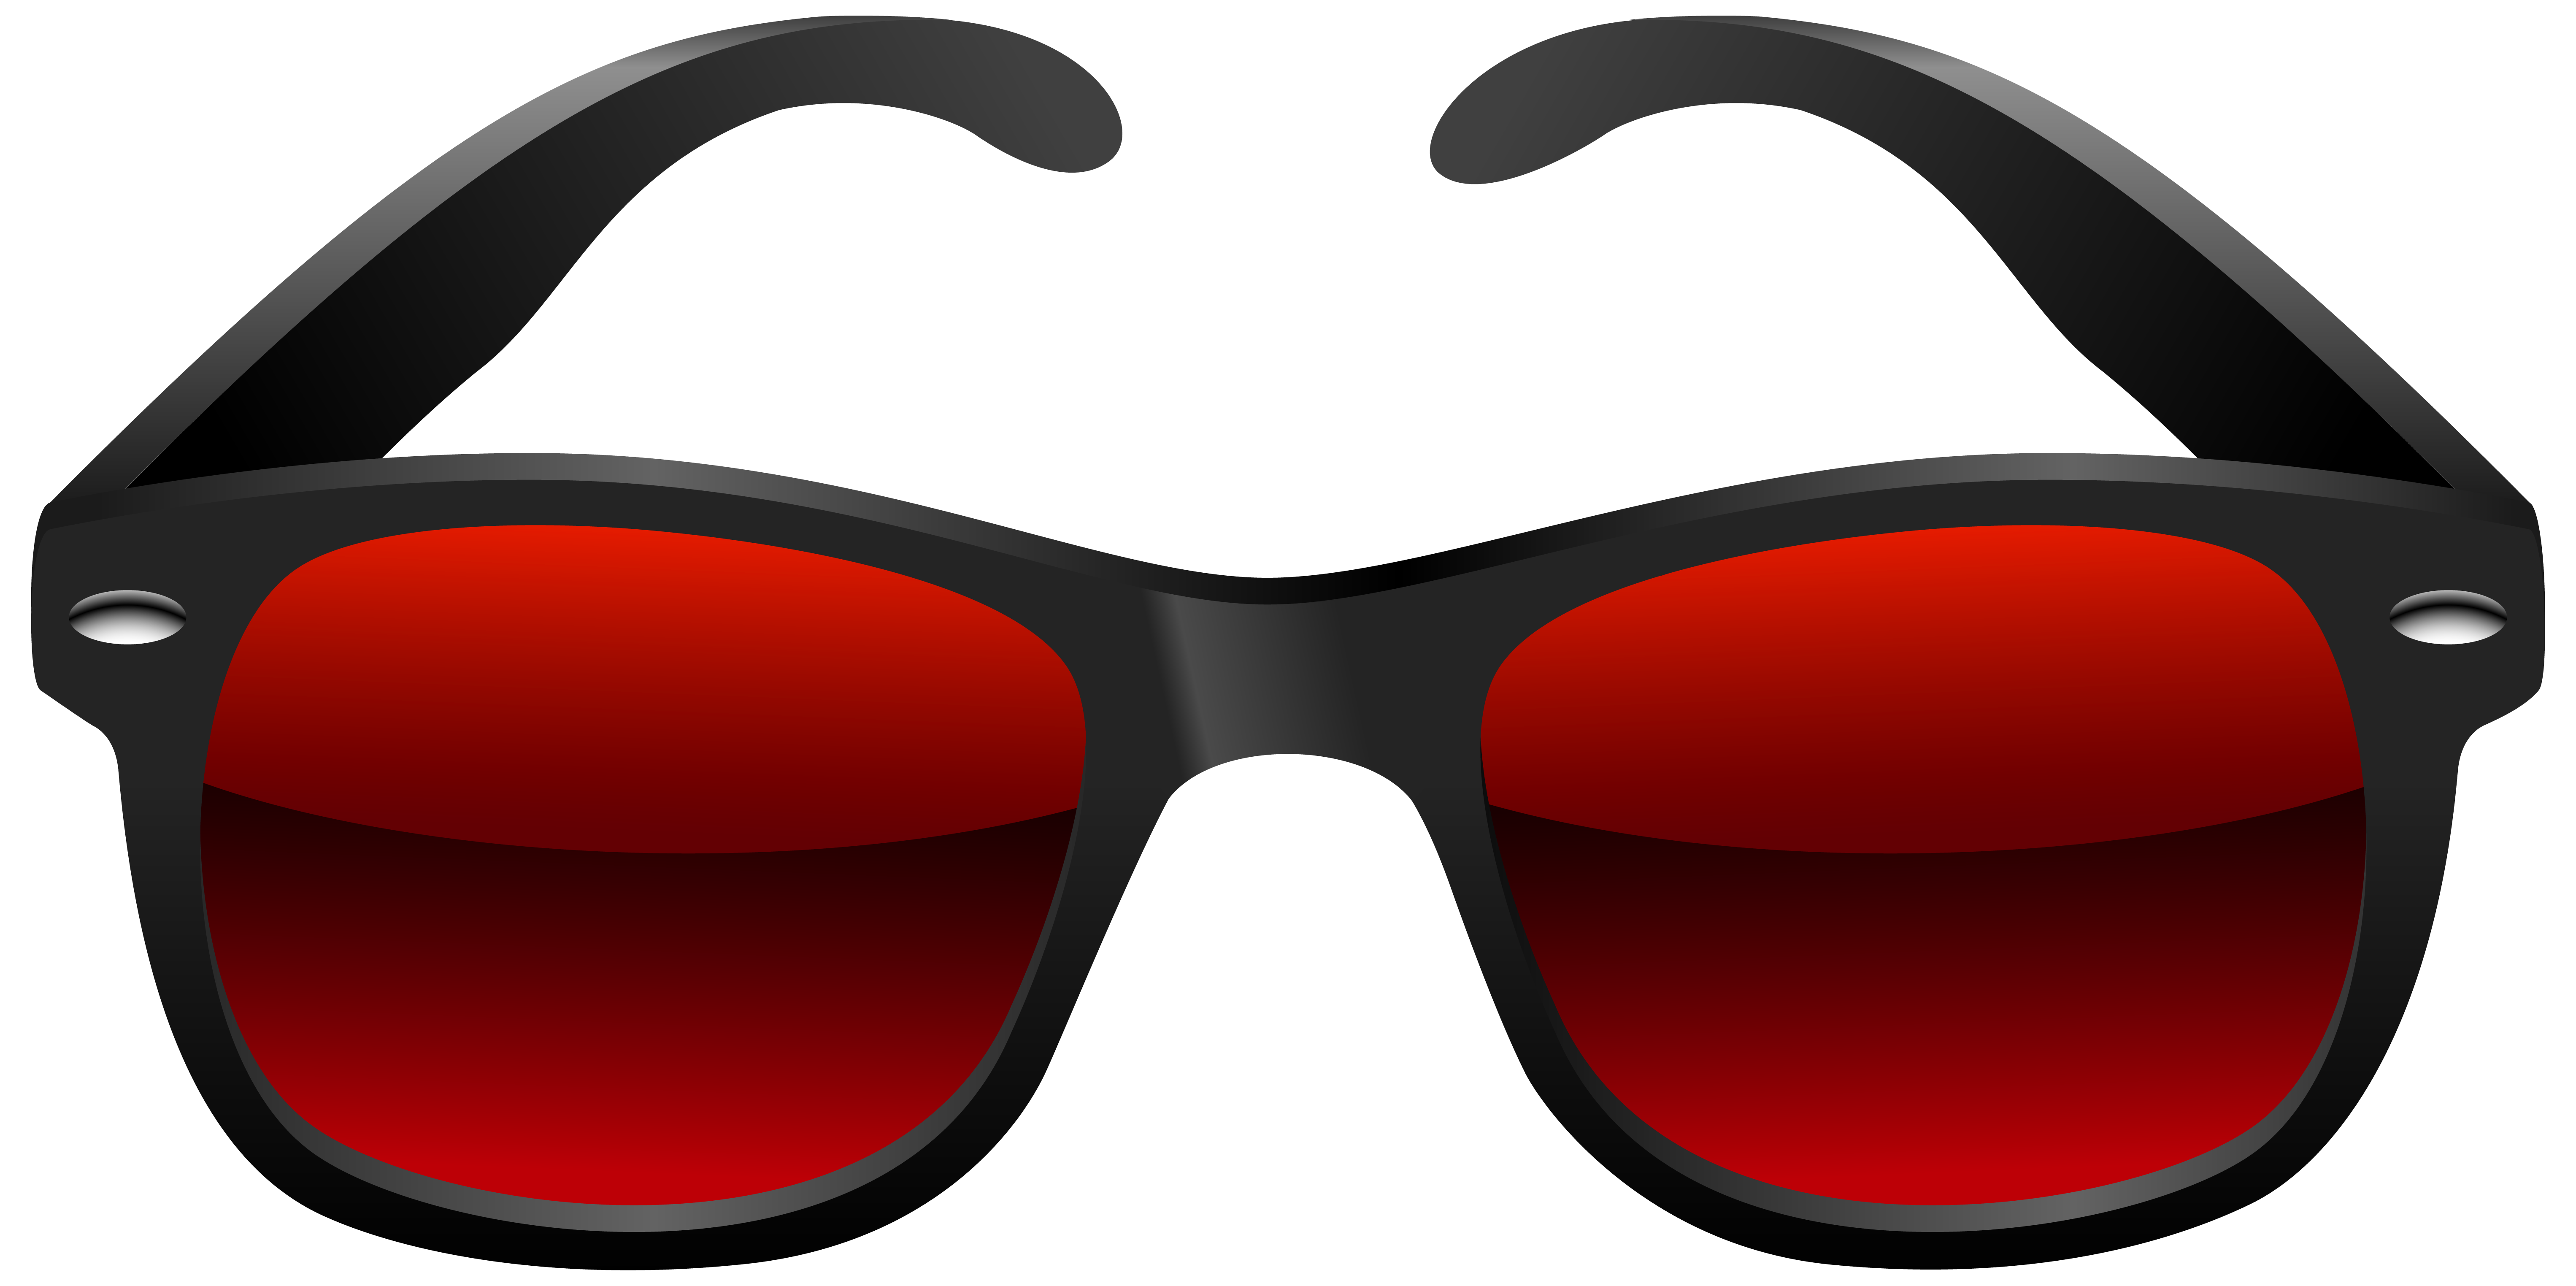 Black Glasses PNGs for Free Download